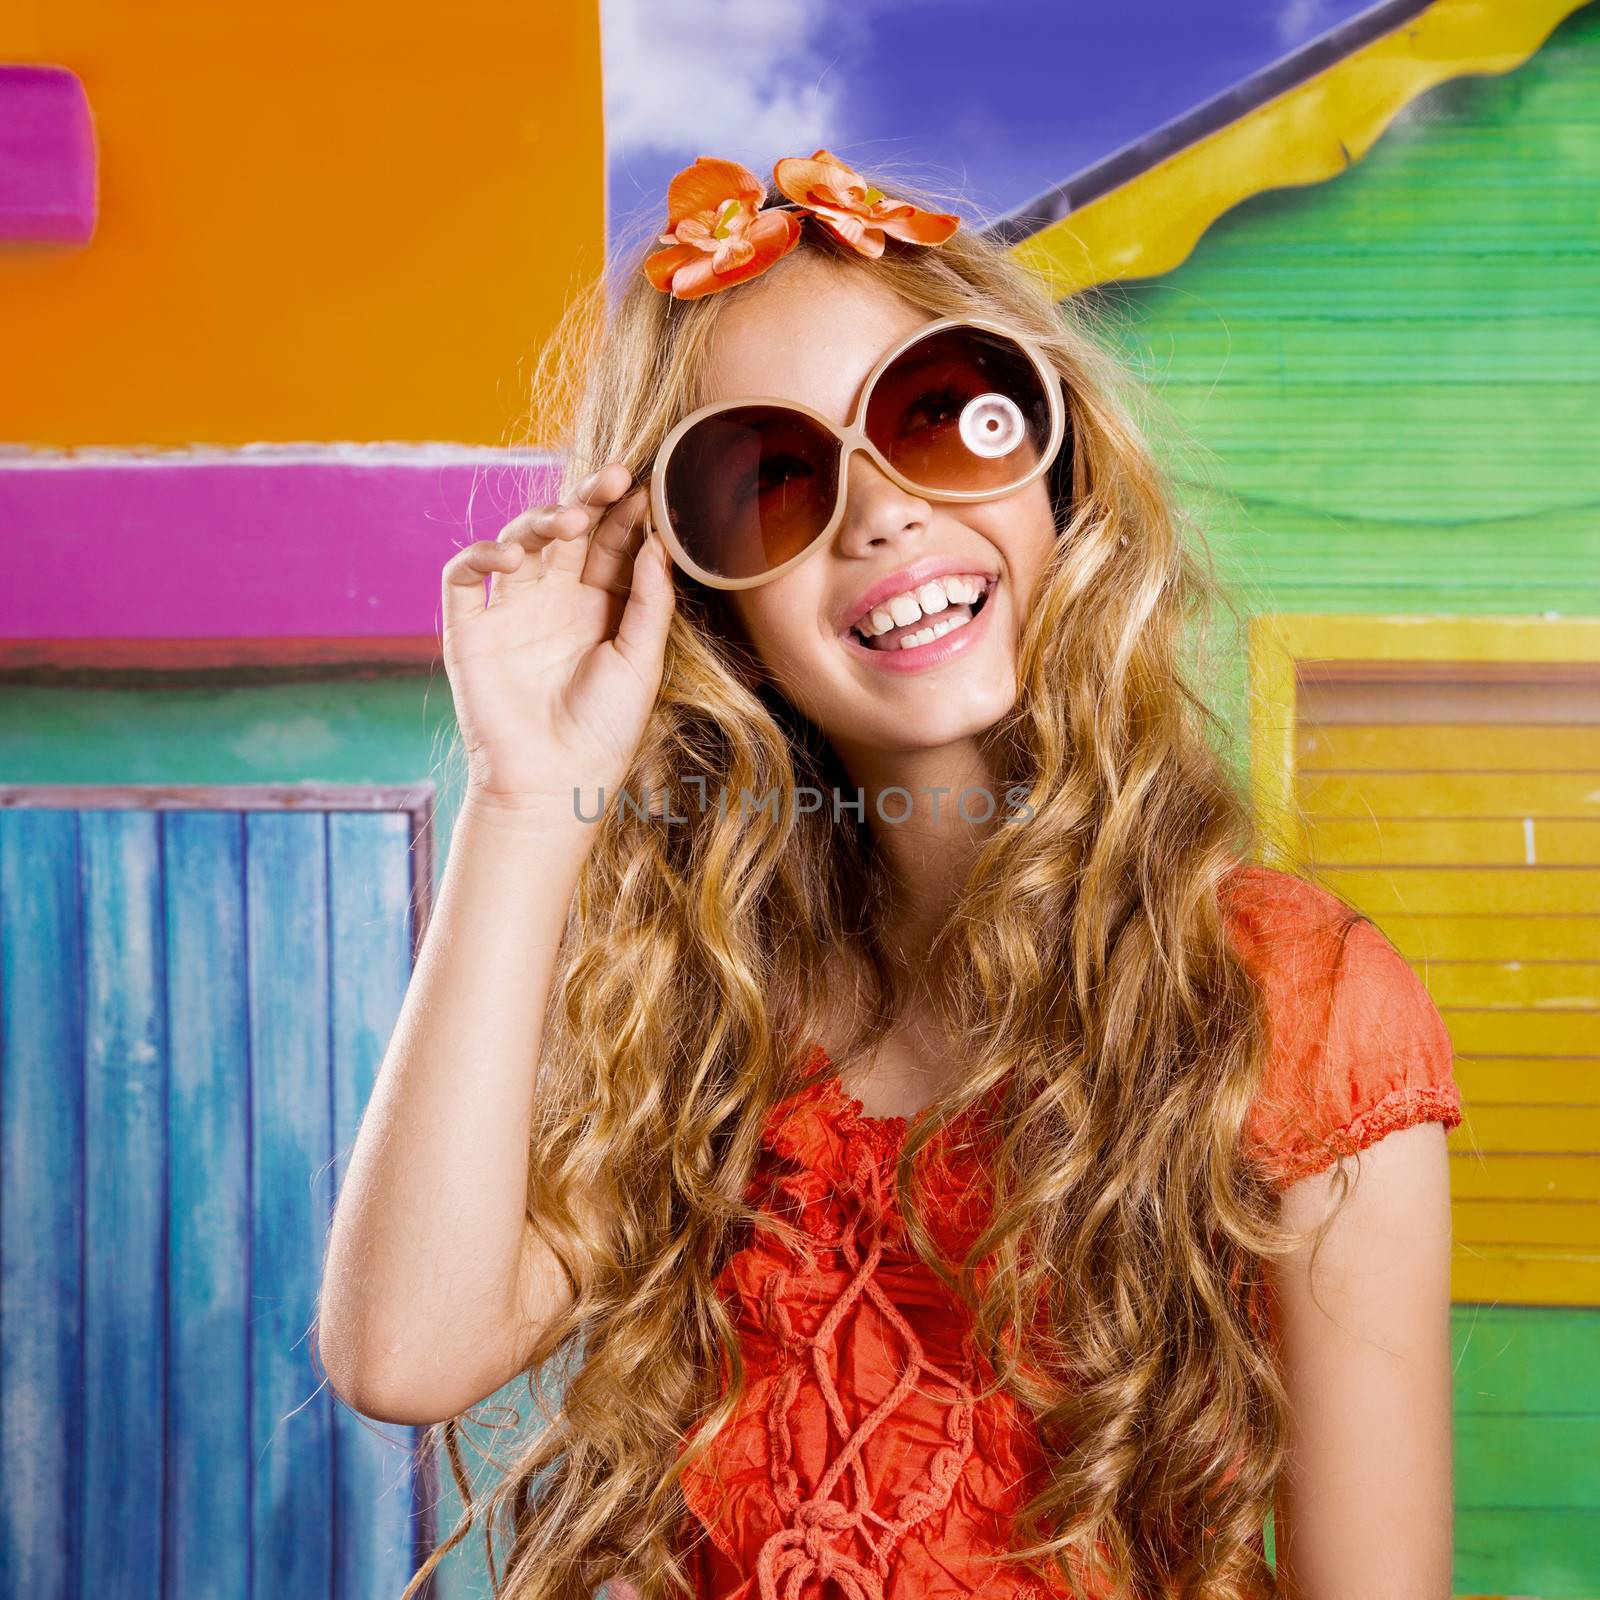 blond children happy tourist girl smiling with sunglasses on a tropical house